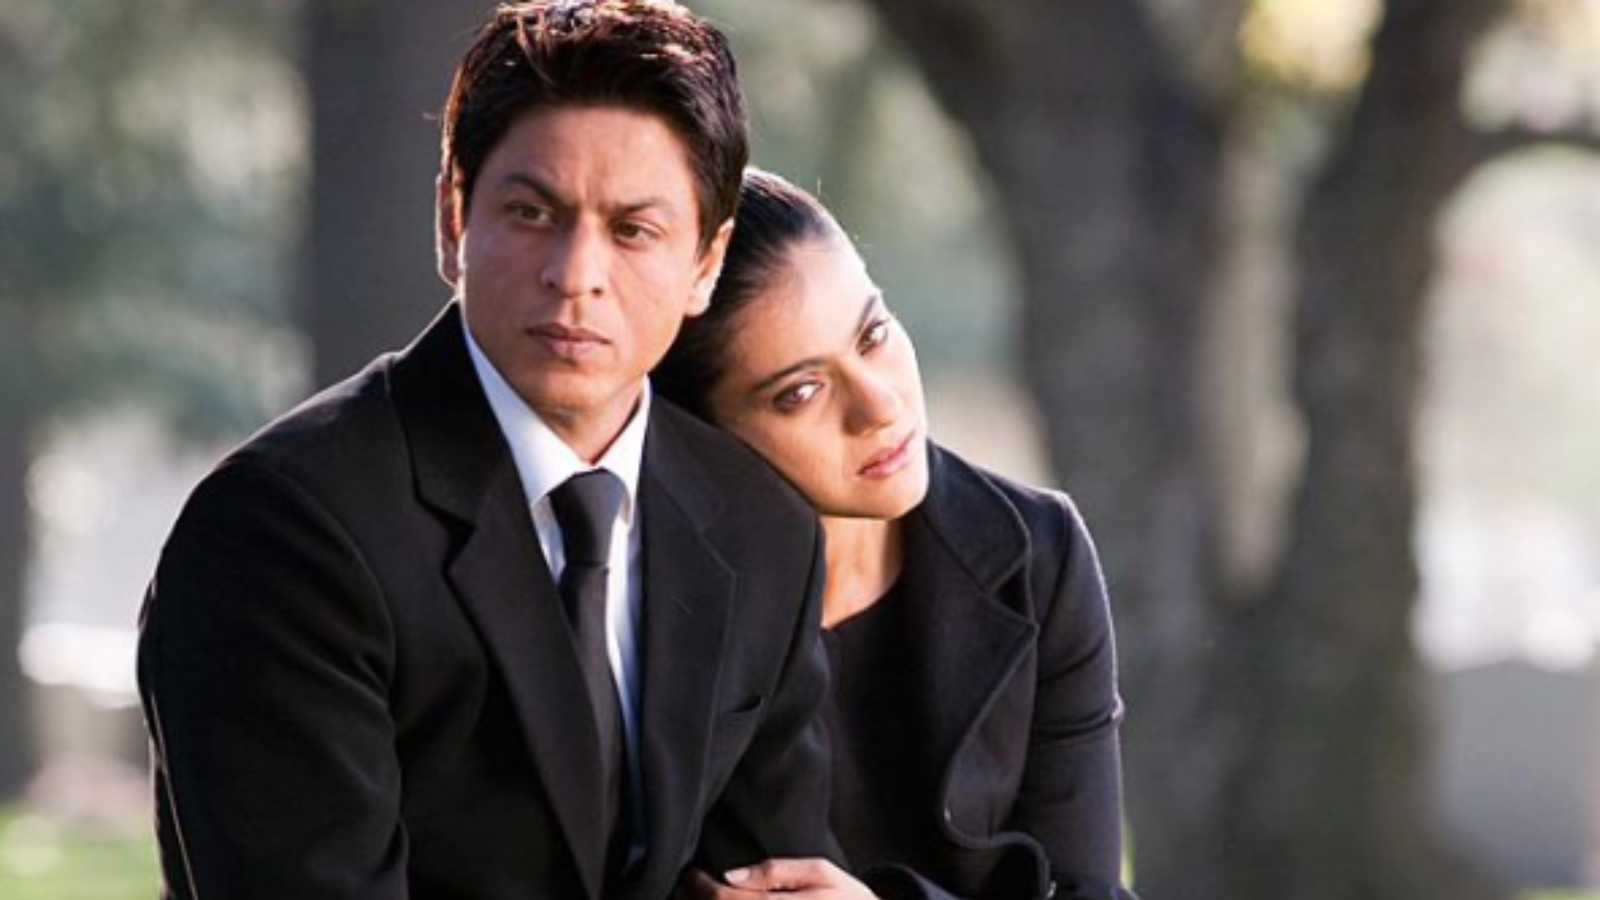 'Countless lives they've touched': Shah Rukh Khan and Kajol's My Name Is Khan turns 14, latter celebrates with a post